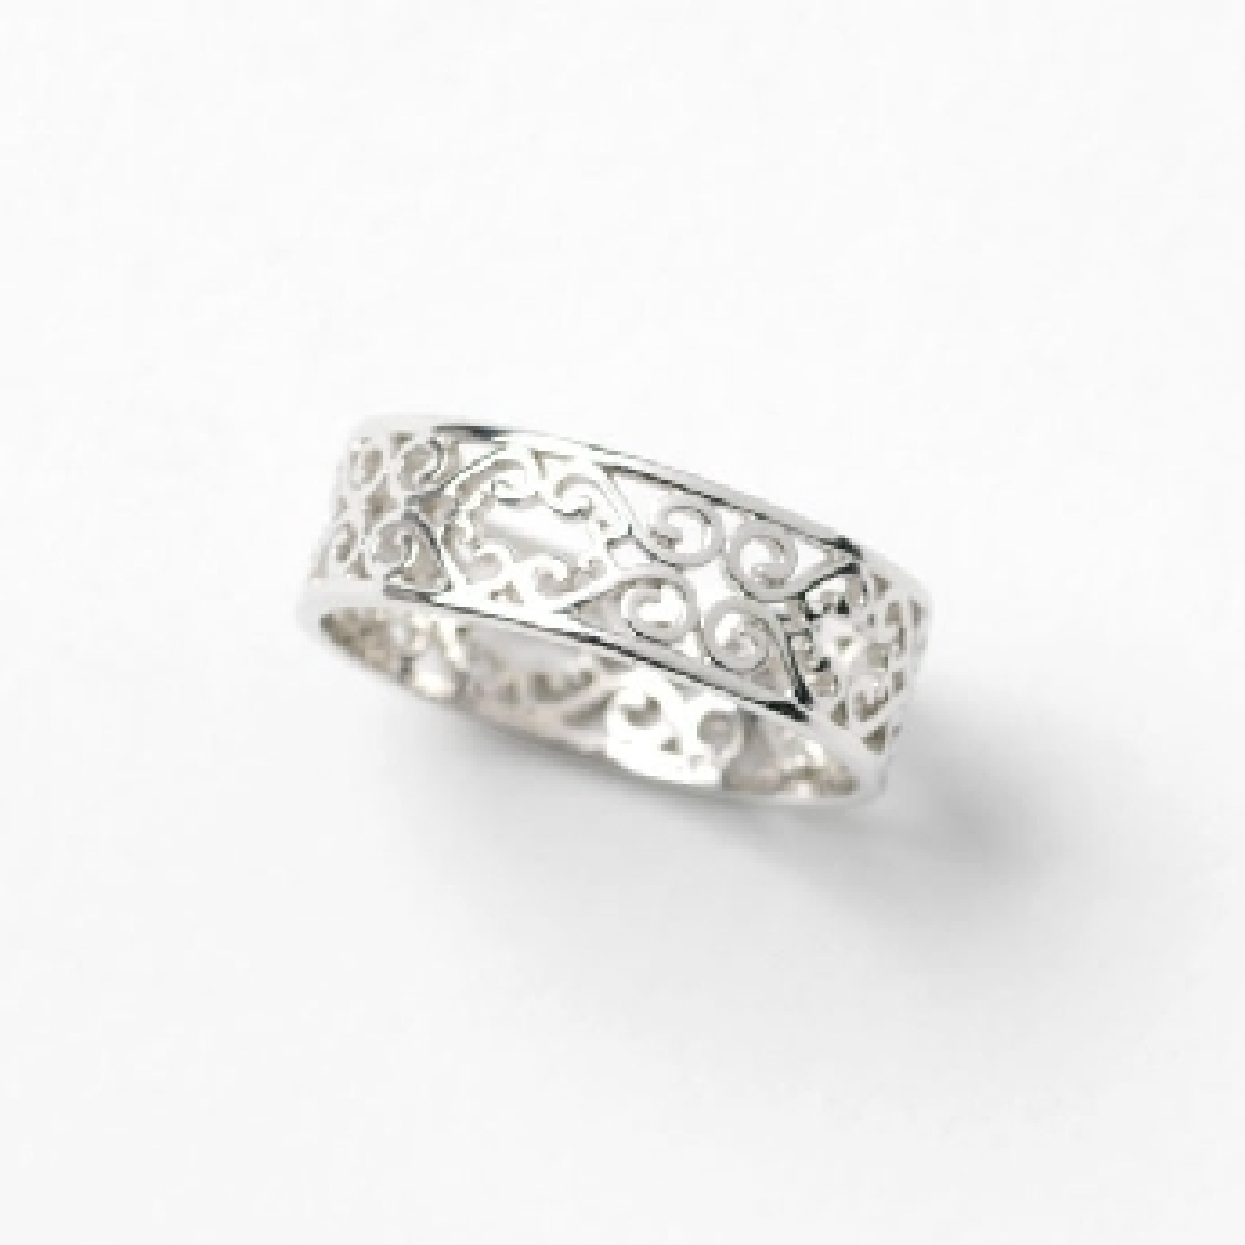 Southern Gates Balcony Series band. Size 6. rhodium plated. R159/6